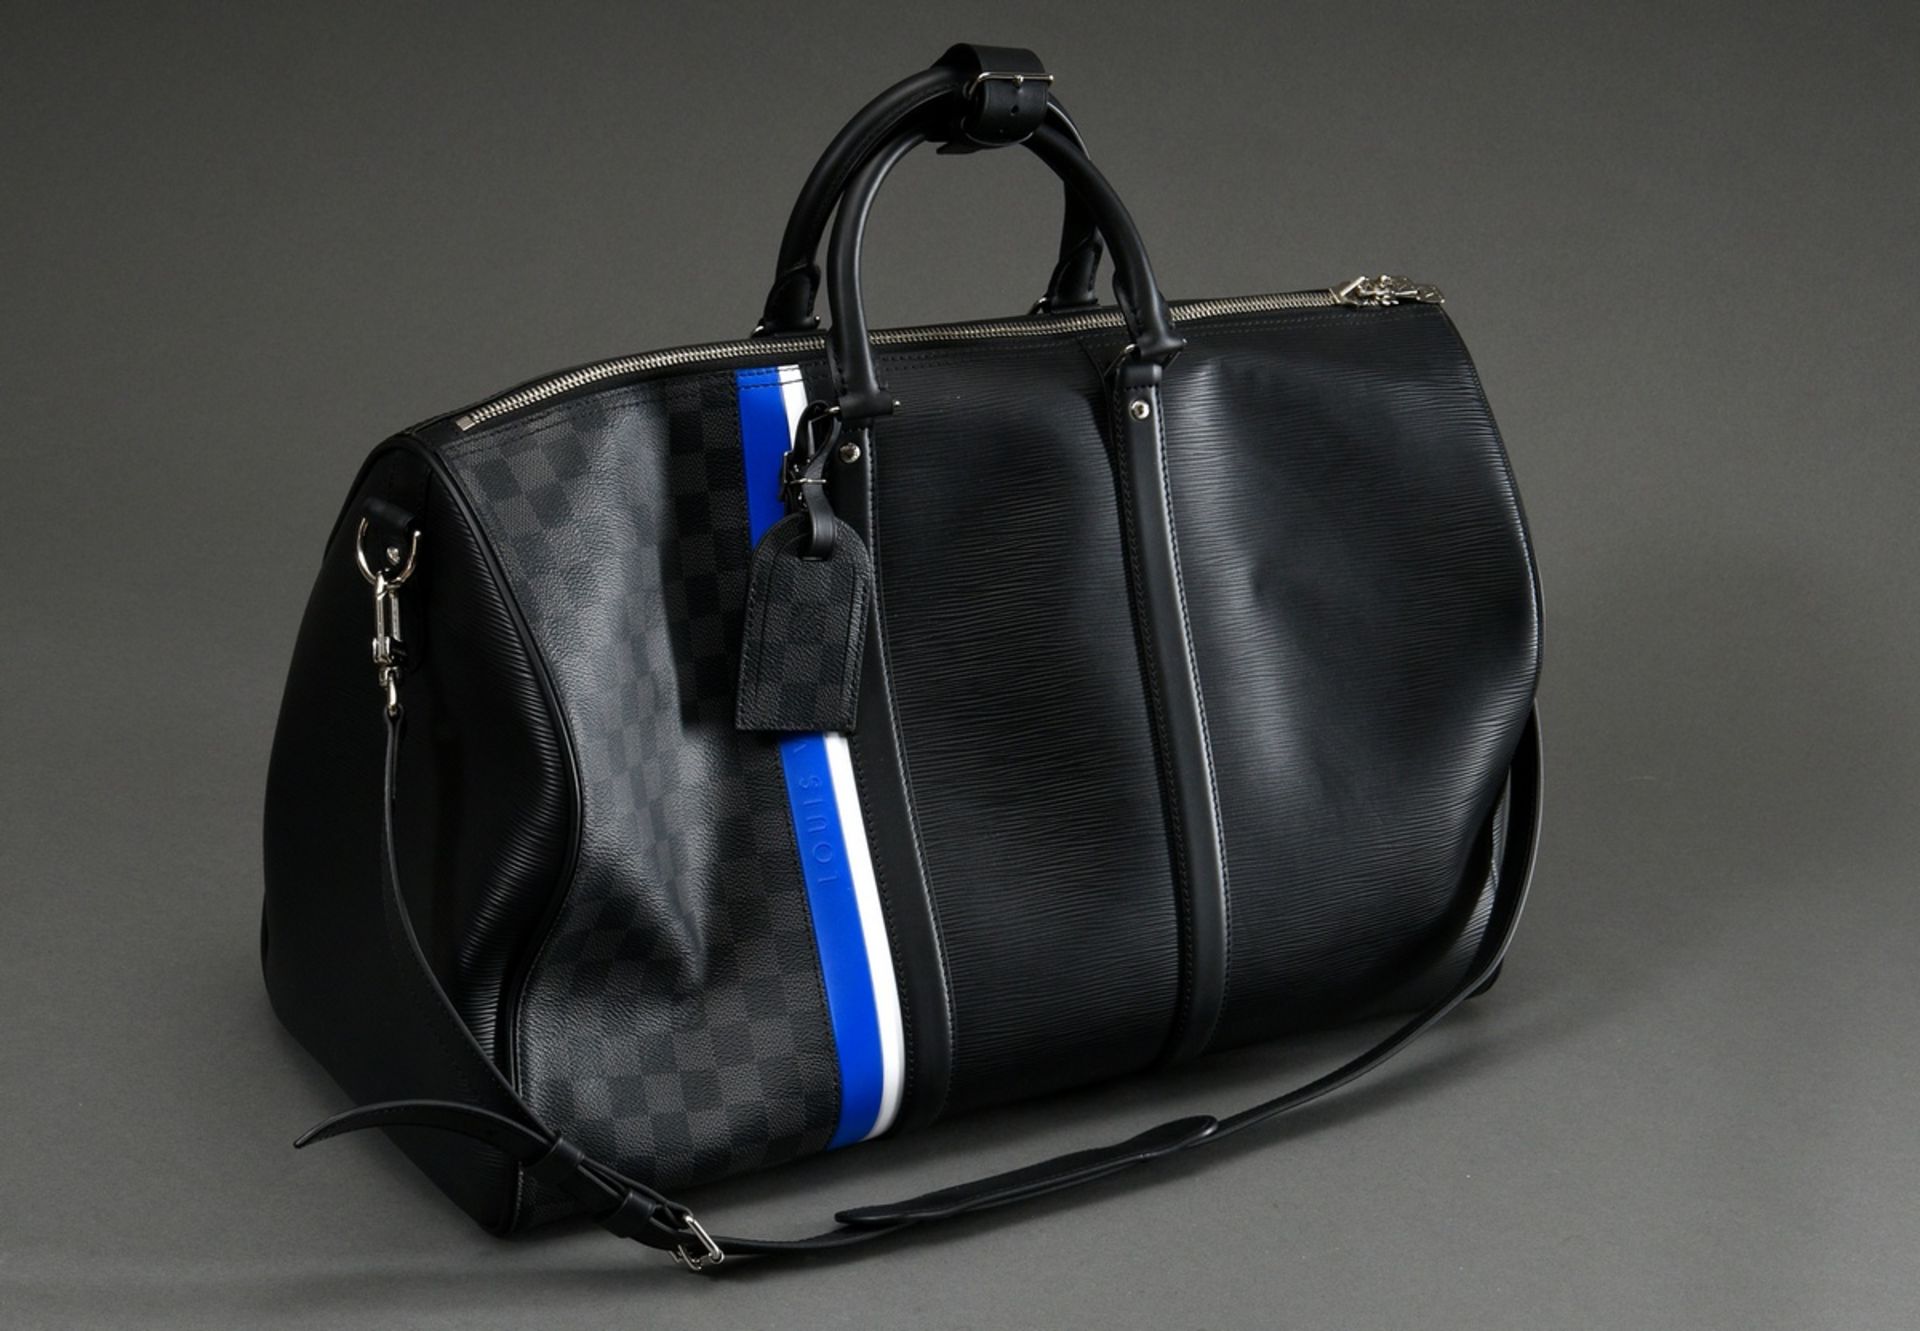 Louis Vuitton "Keepall 50" in Epi black, Damier graphite and raised Brand lettering on blue and whi